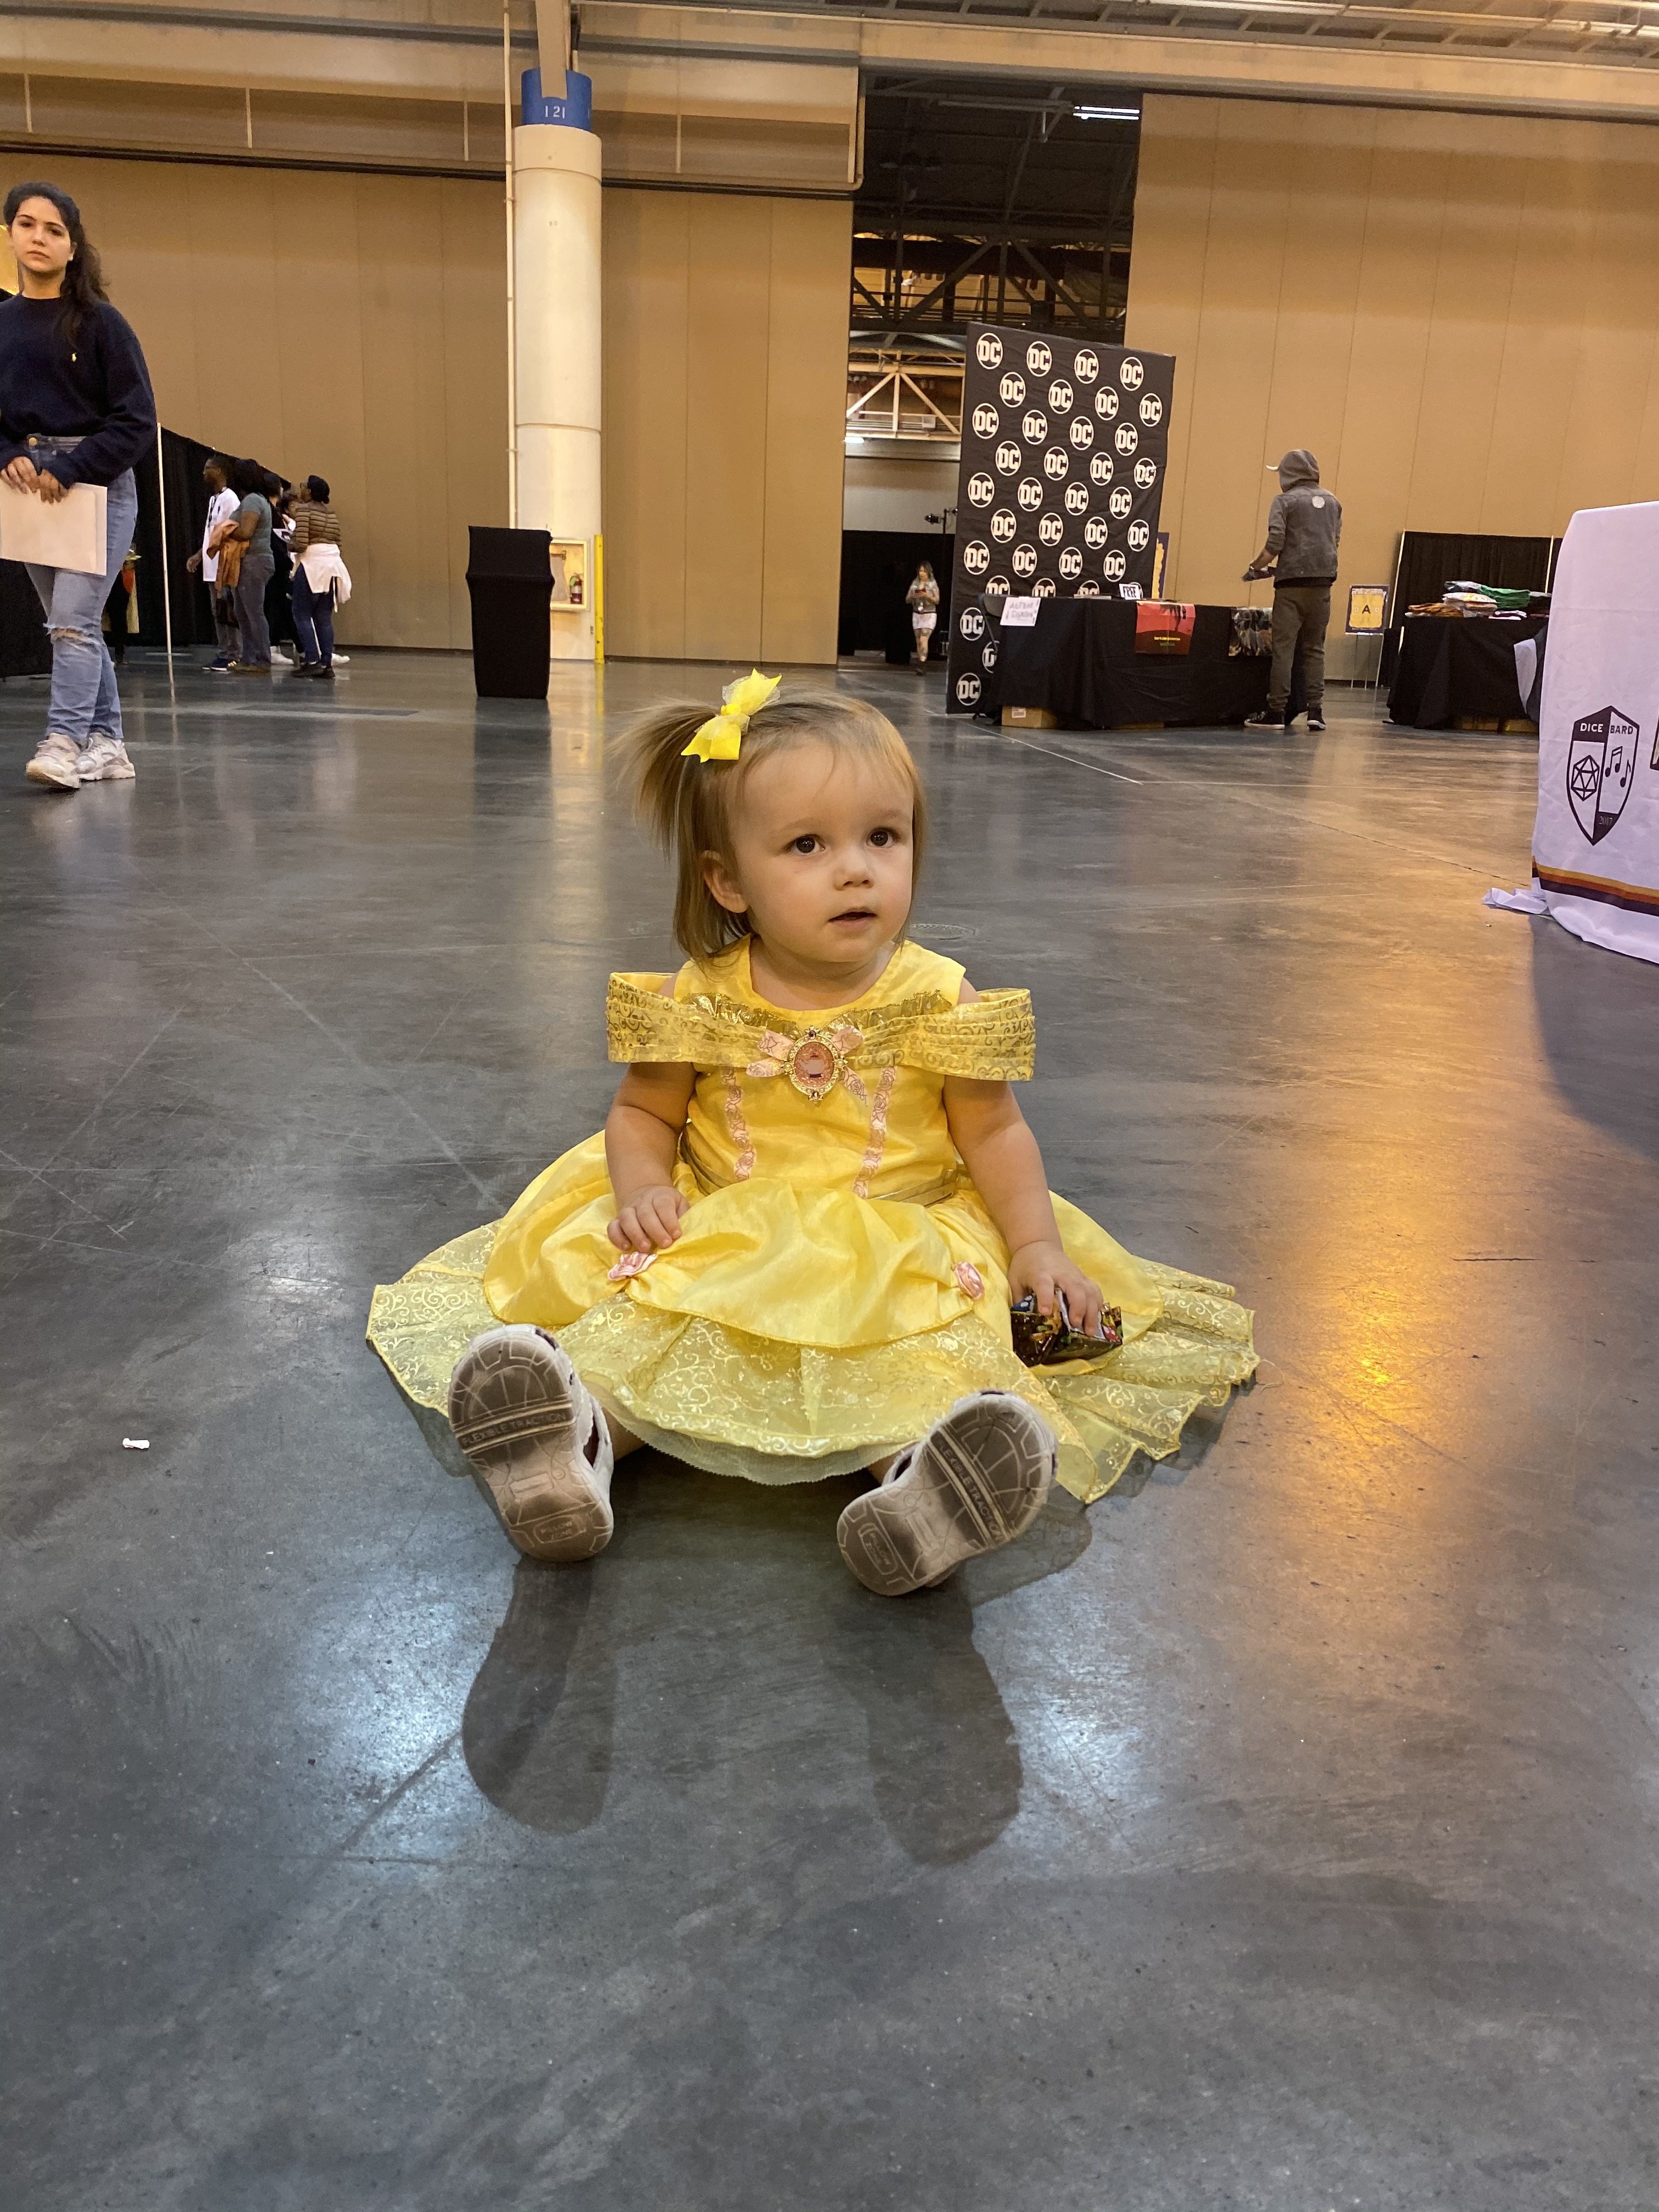 Big Easy Con 2019 Review: it exhausted our little one!